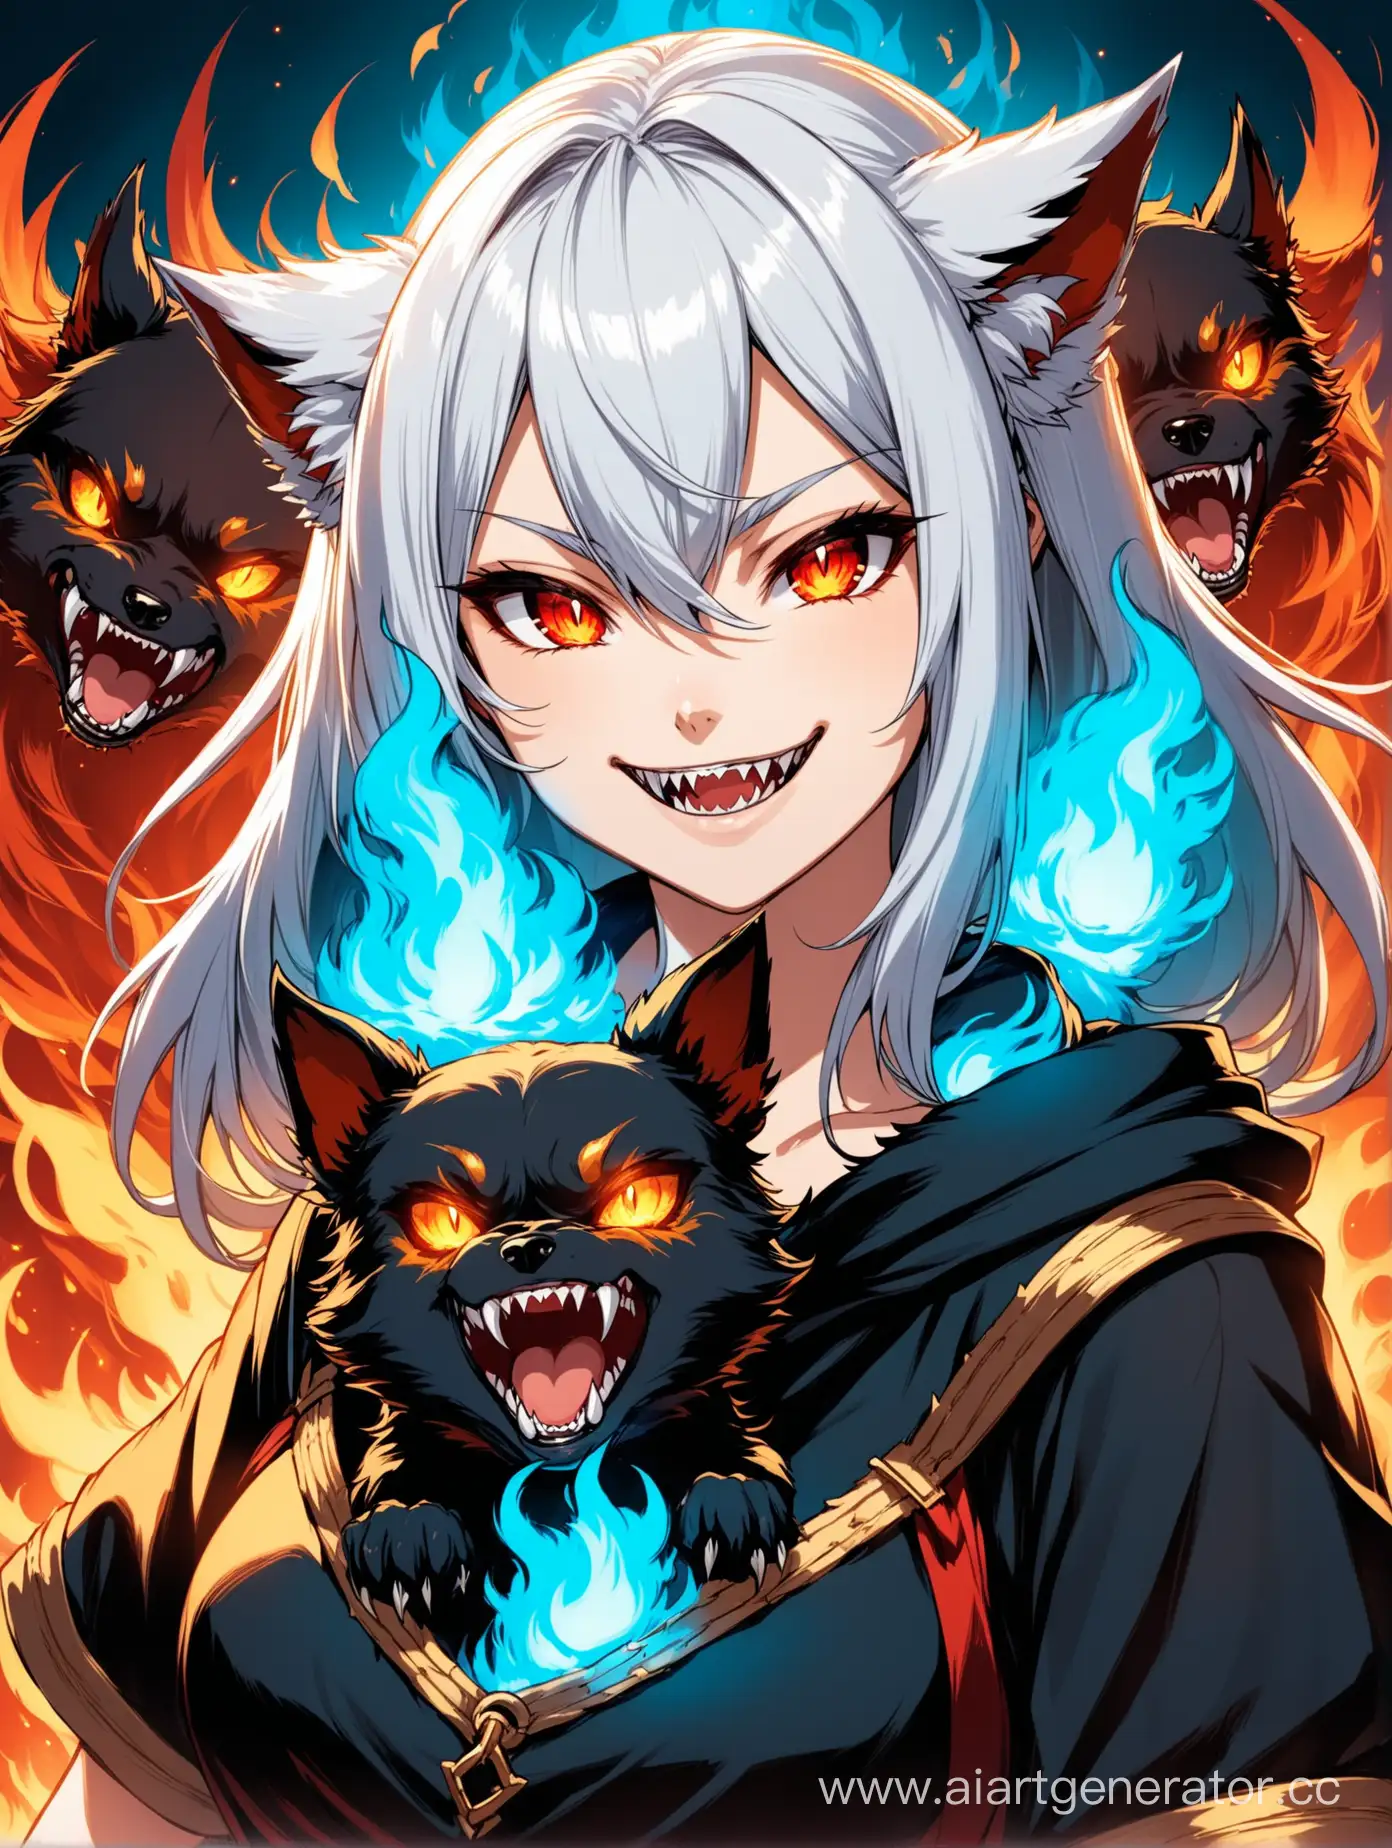 Sly-Smiling-Cerberus-Girl-with-Silver-Hair-and-RedGold-Eyes